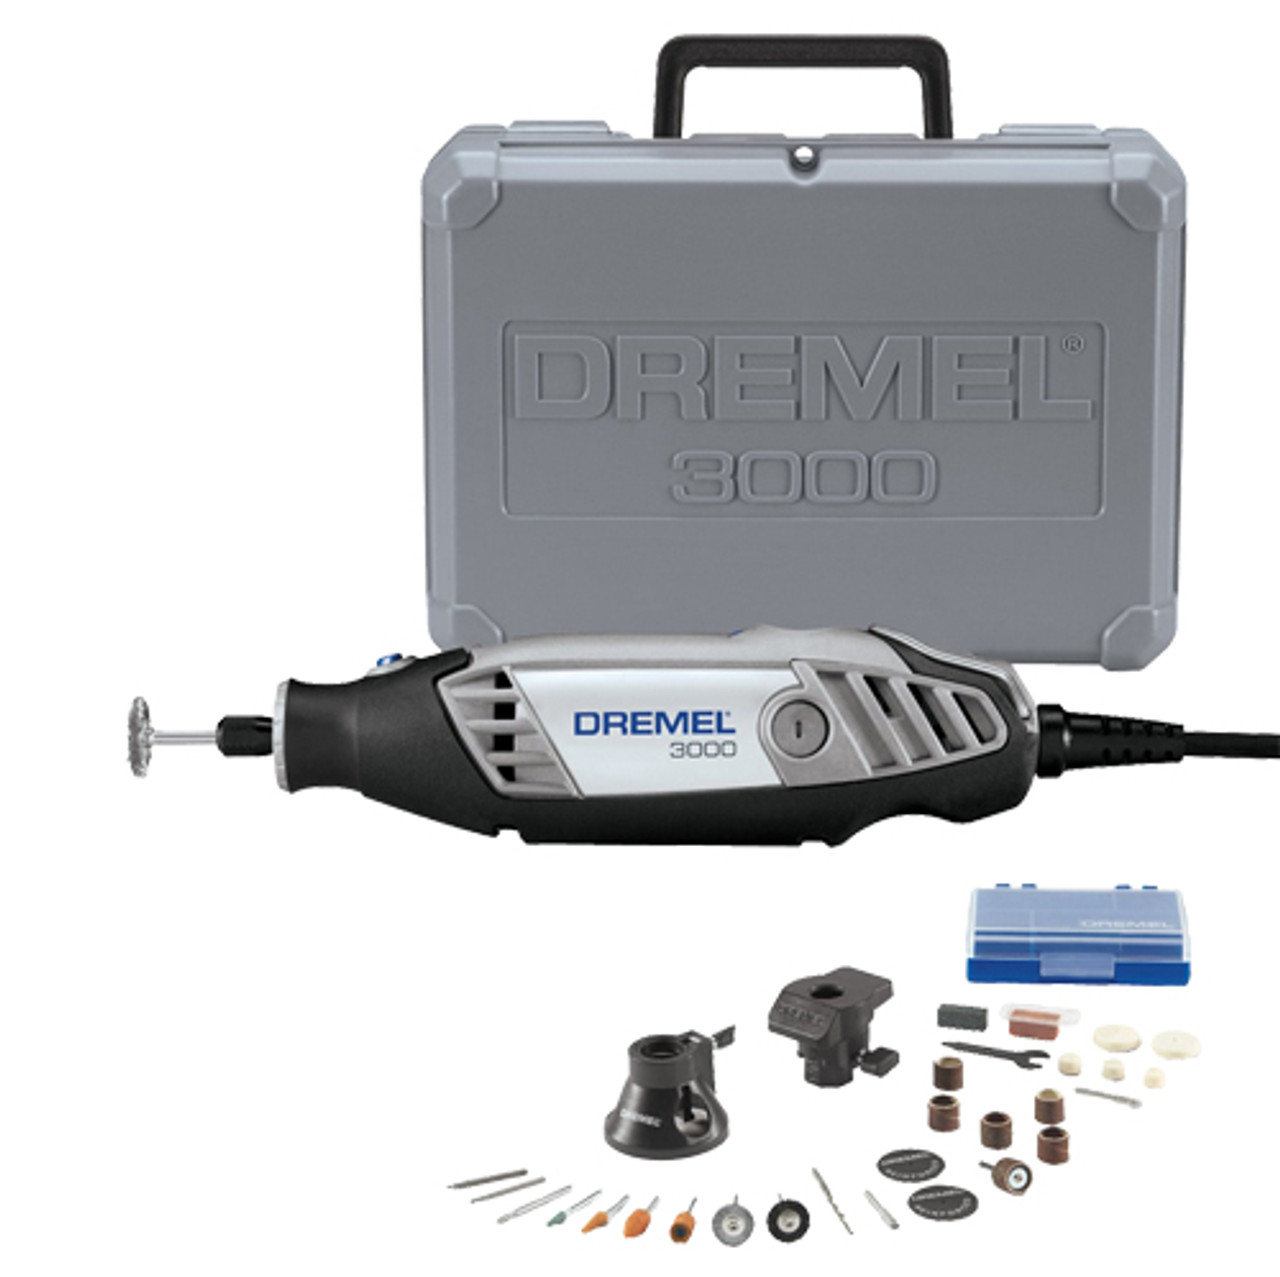 Dremel 3000 Variable Speed Rotary Tool Kit, 28-Piece - Midwest Technology  Products